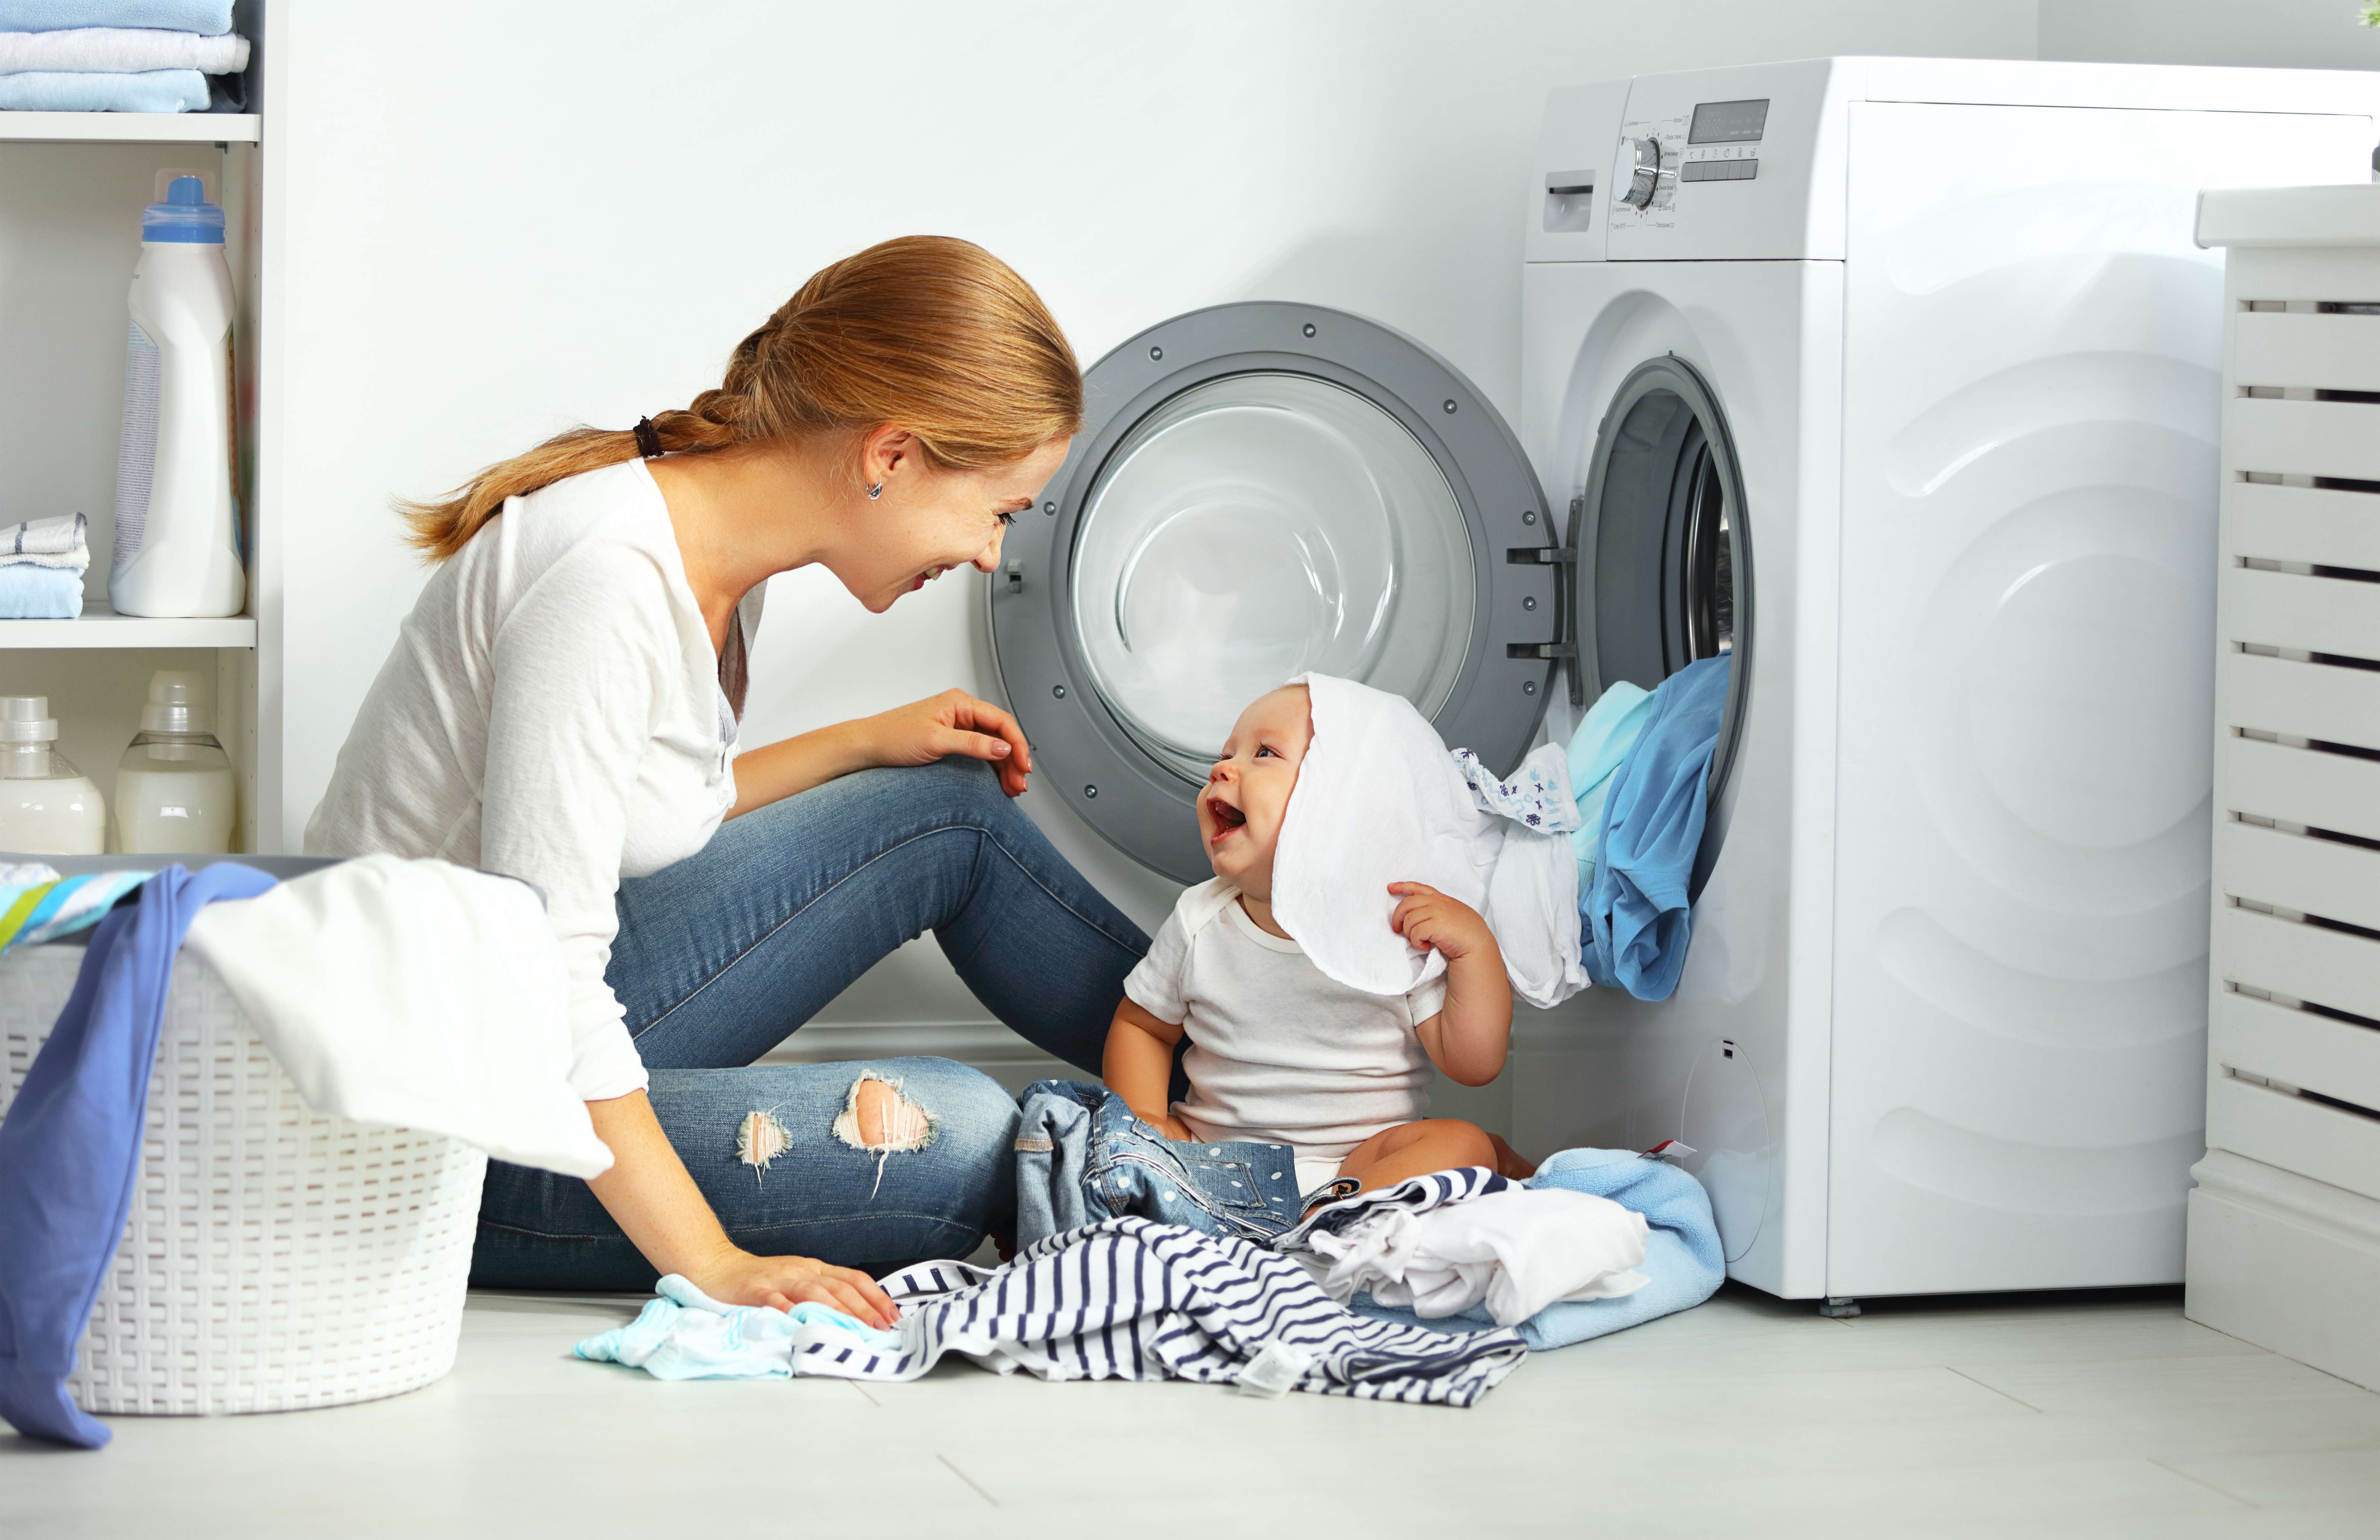 Newborn with mother and baby laundry.jpg